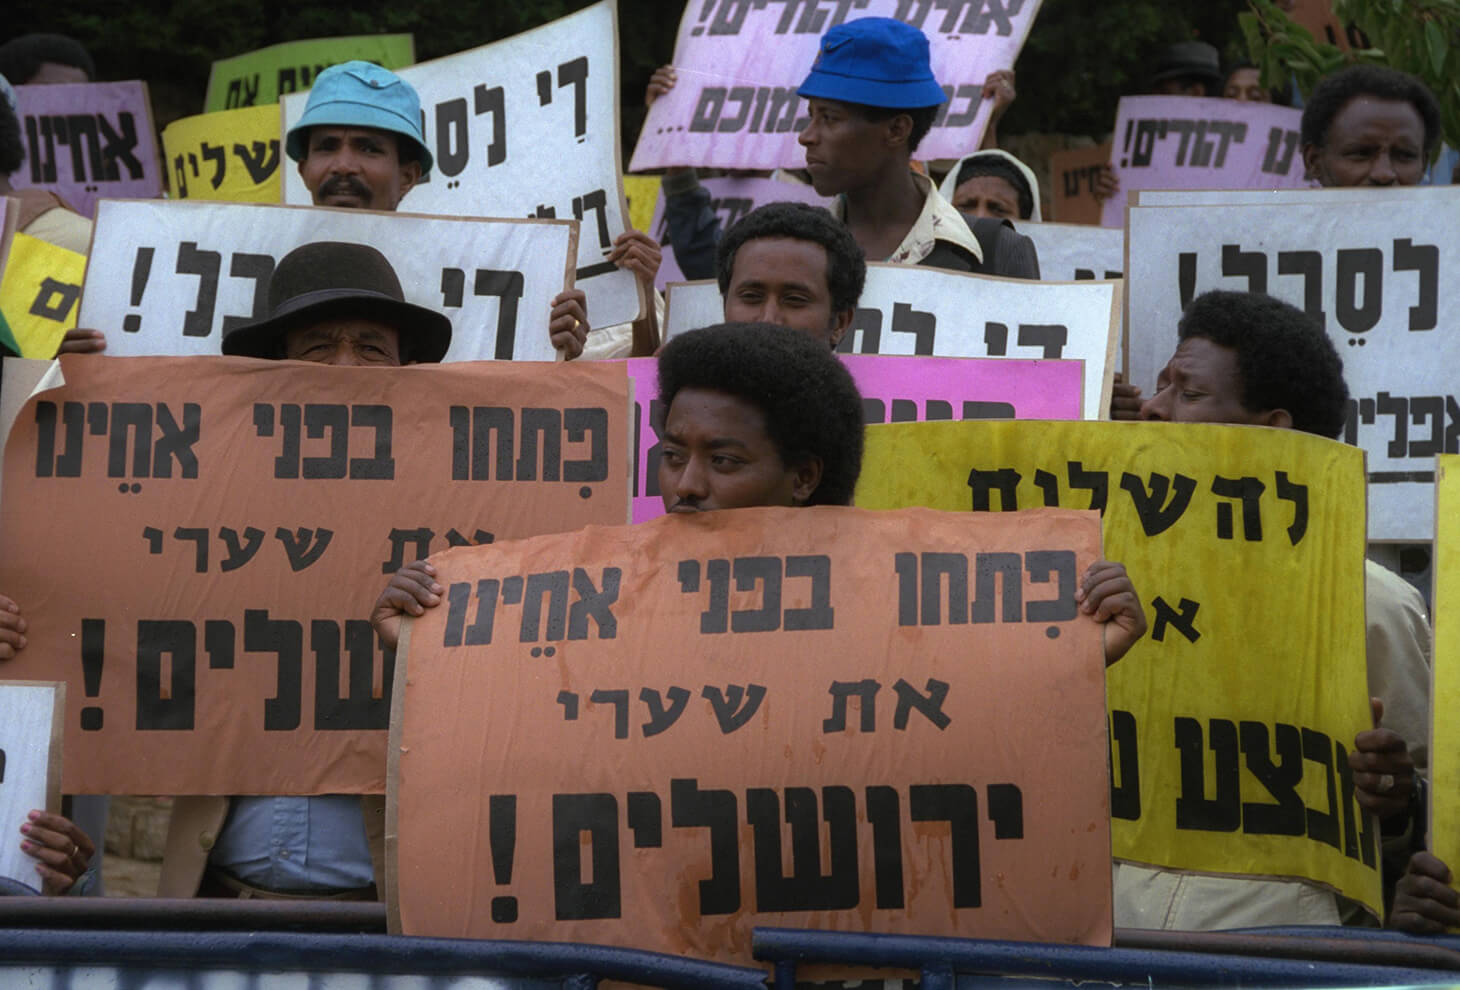 ETHIOPIAN IMMIGRANTS DEMONSTRATING OUTSIDE THE P.M.'S OFFICE IN JERUSALEM. PHOTO BY: Photo: Ziv Koren, GPO